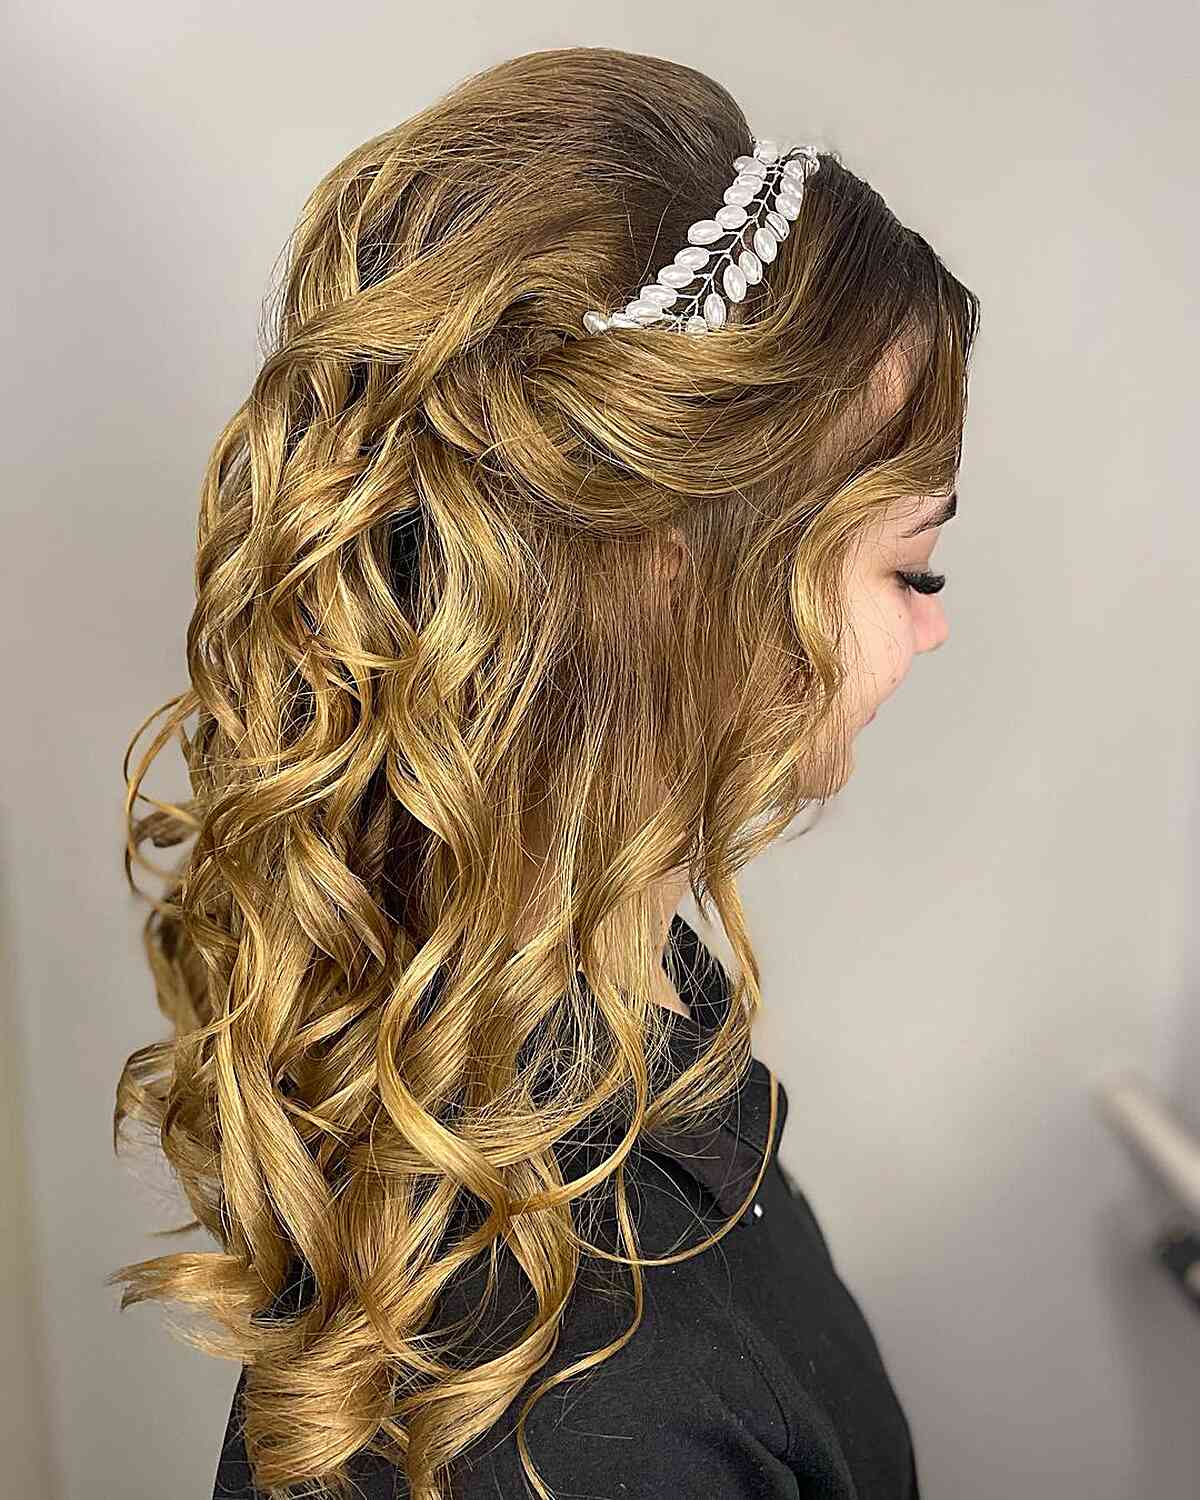 Bouffant with Pearl Headband and Loose Curls for Long Blonde Hair